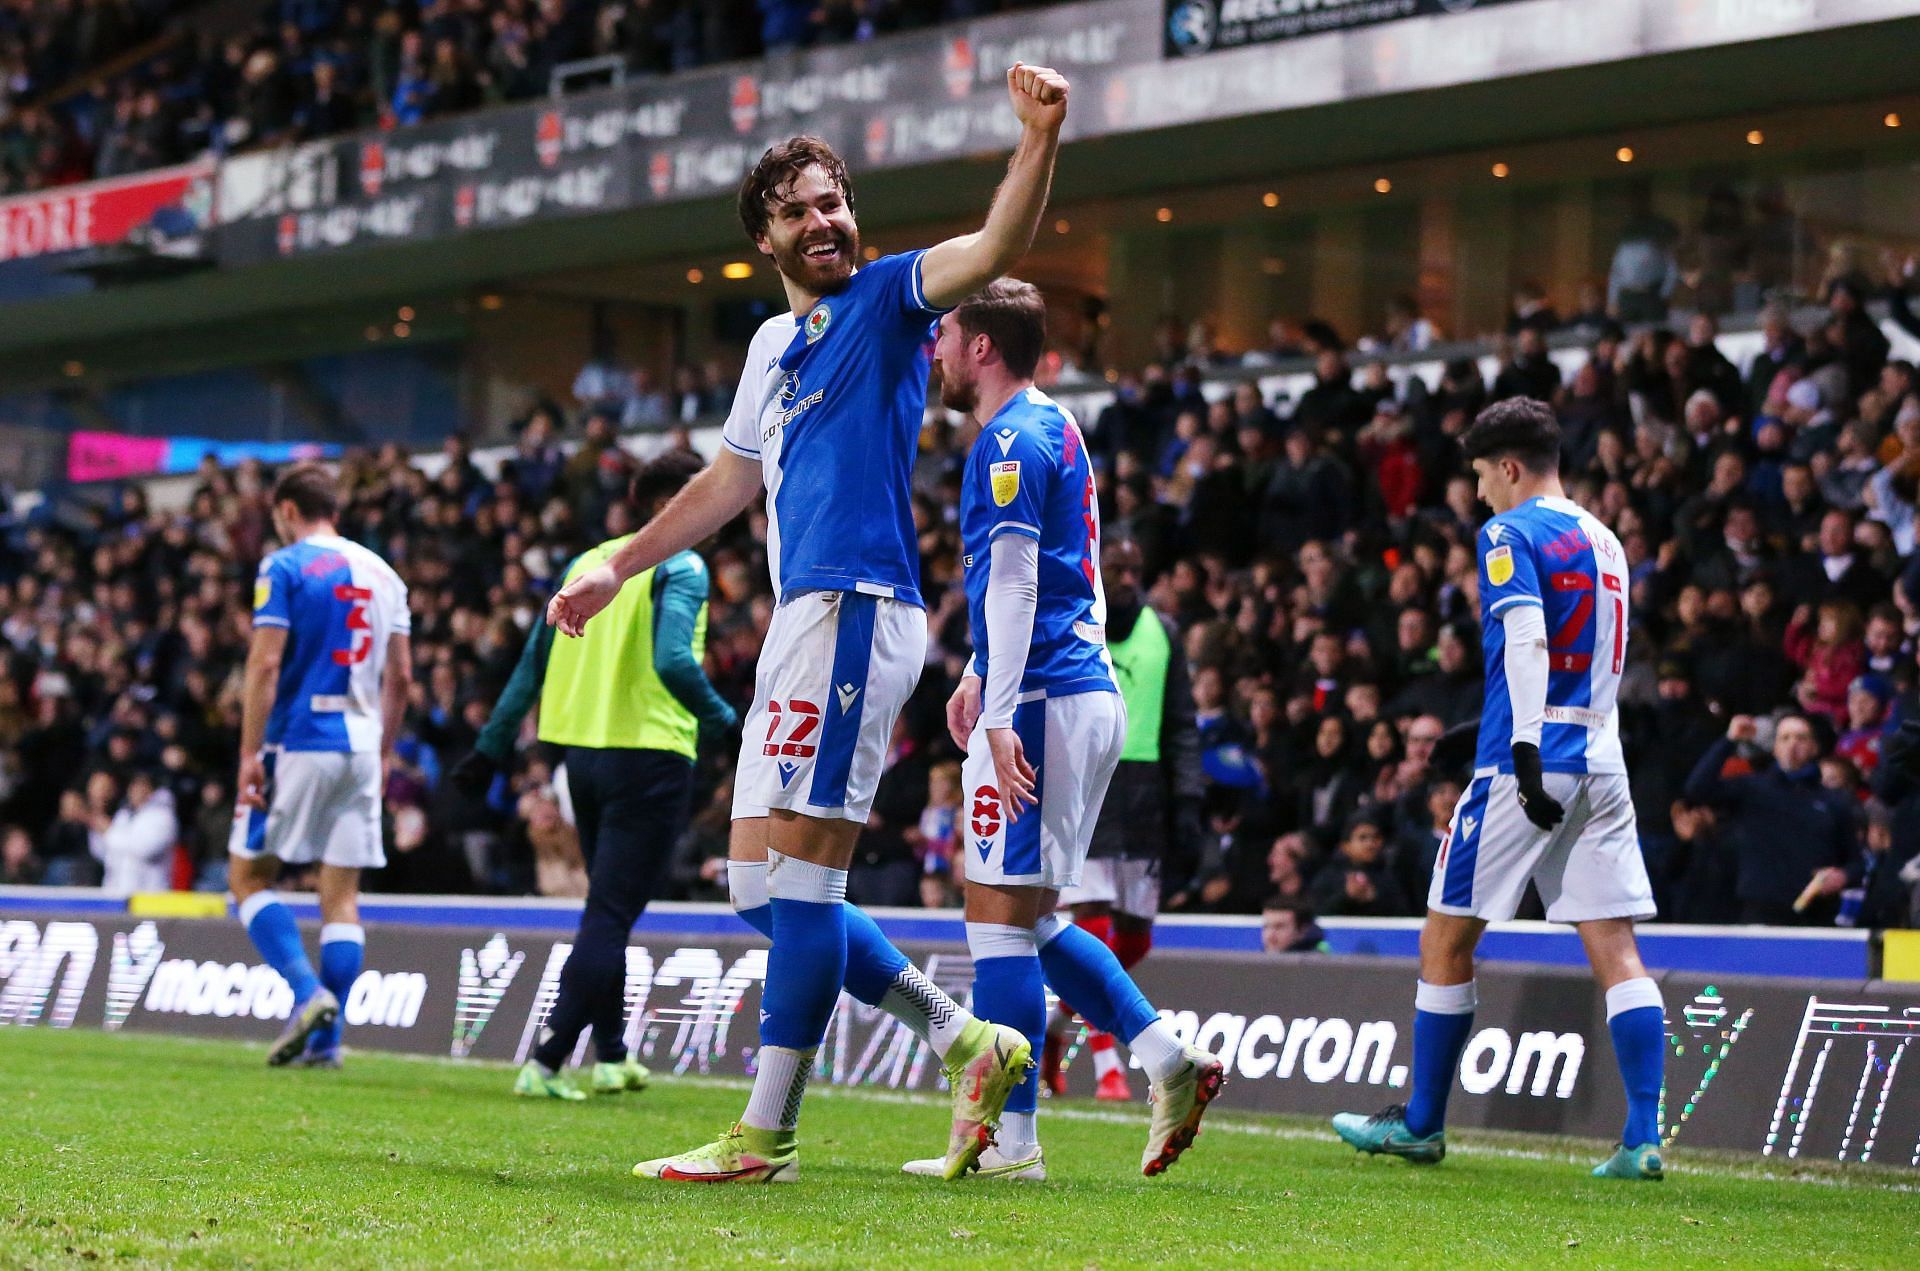 Blackburn Rovers will host Middlesbrough on Monday - Sky Bet Championship